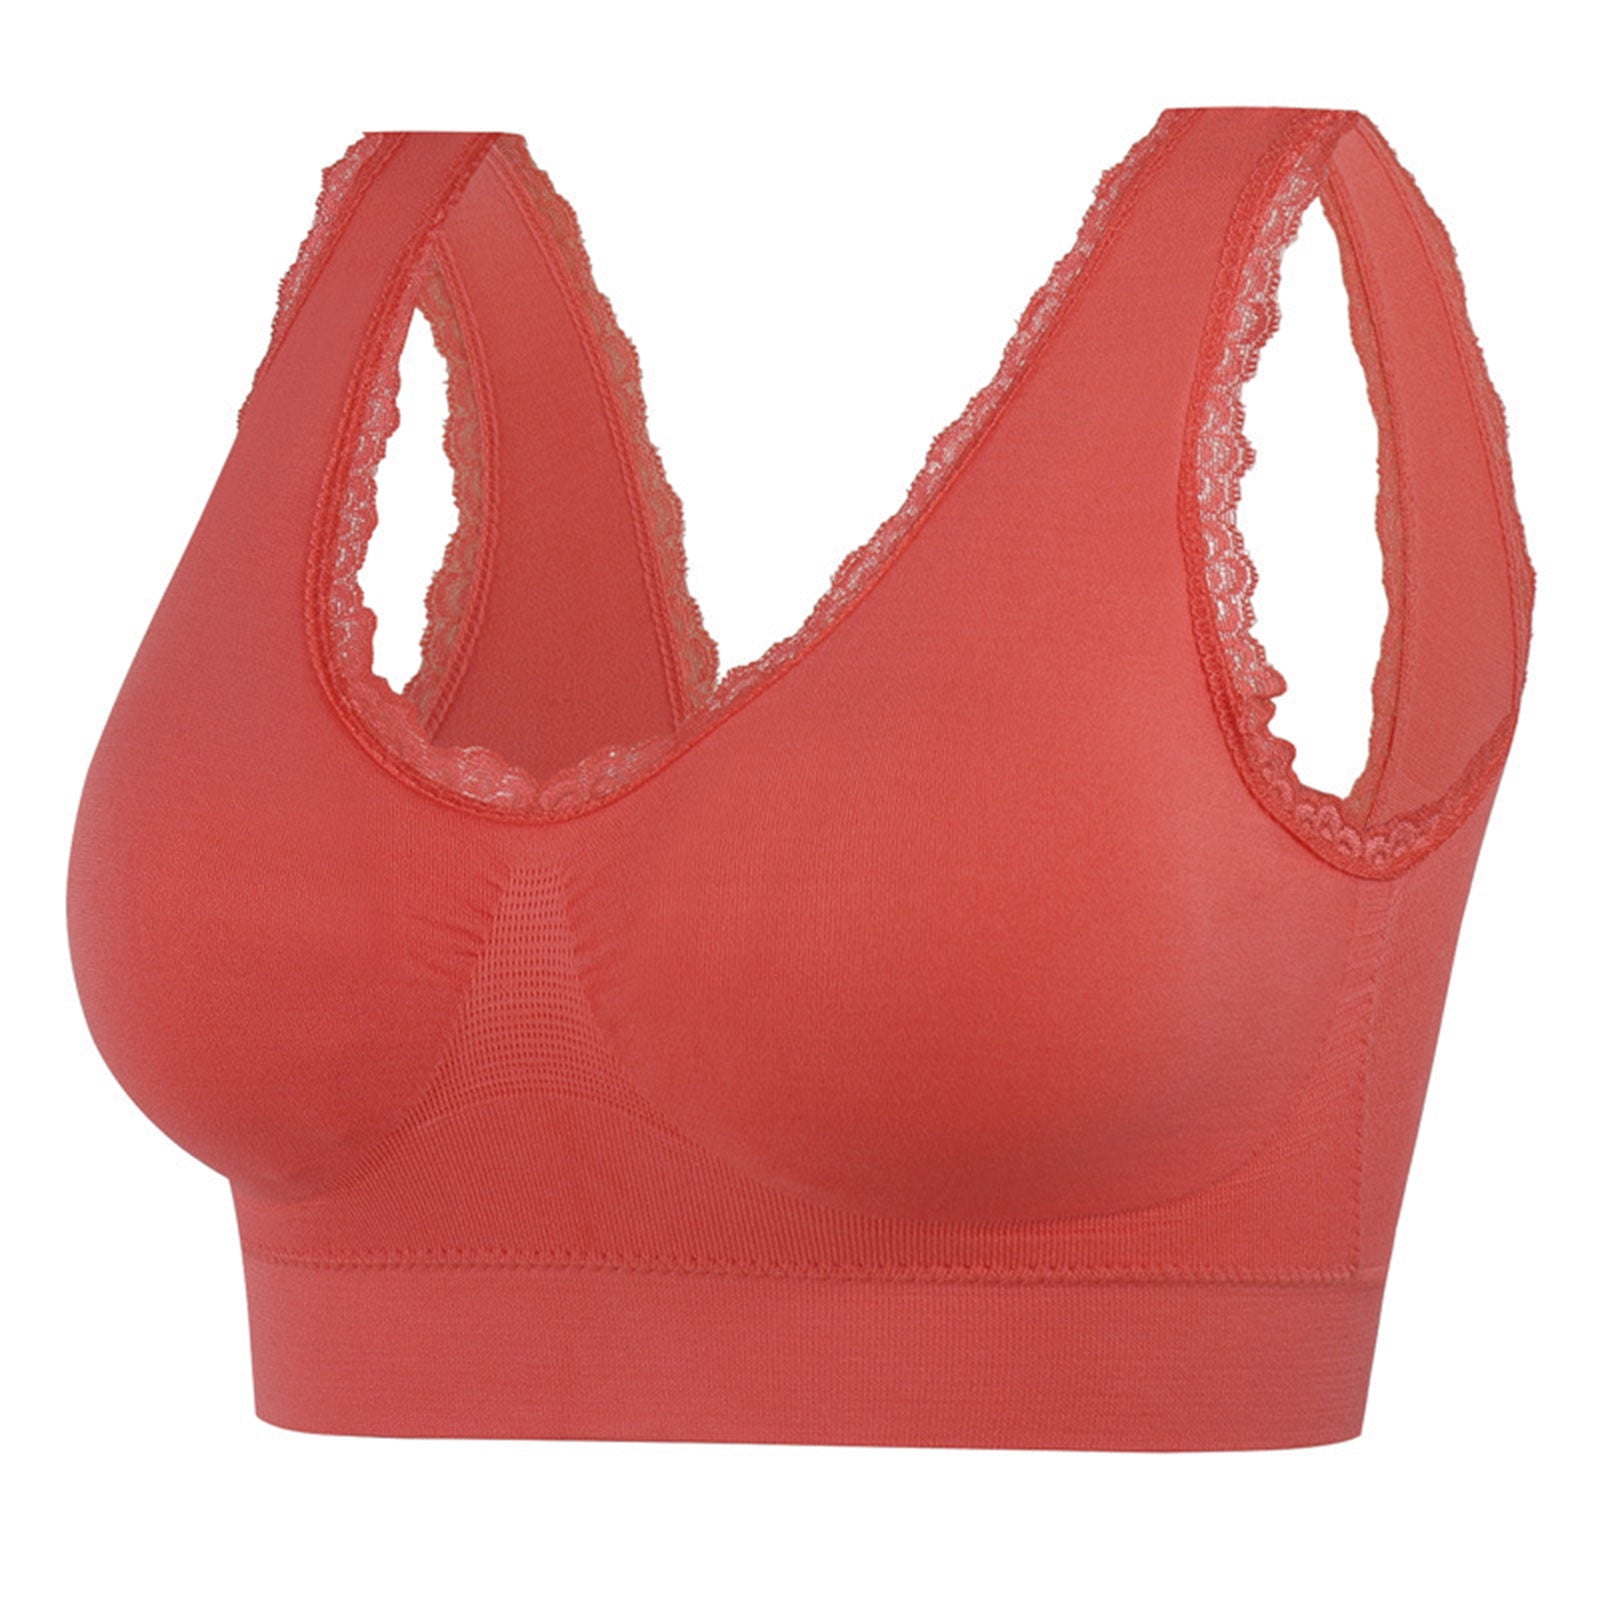 LIBRCLO Breathable Cool Liftup Air Bra, New Breathable and Comfortable Mesh  Sports Bra Designed Specifically for Women